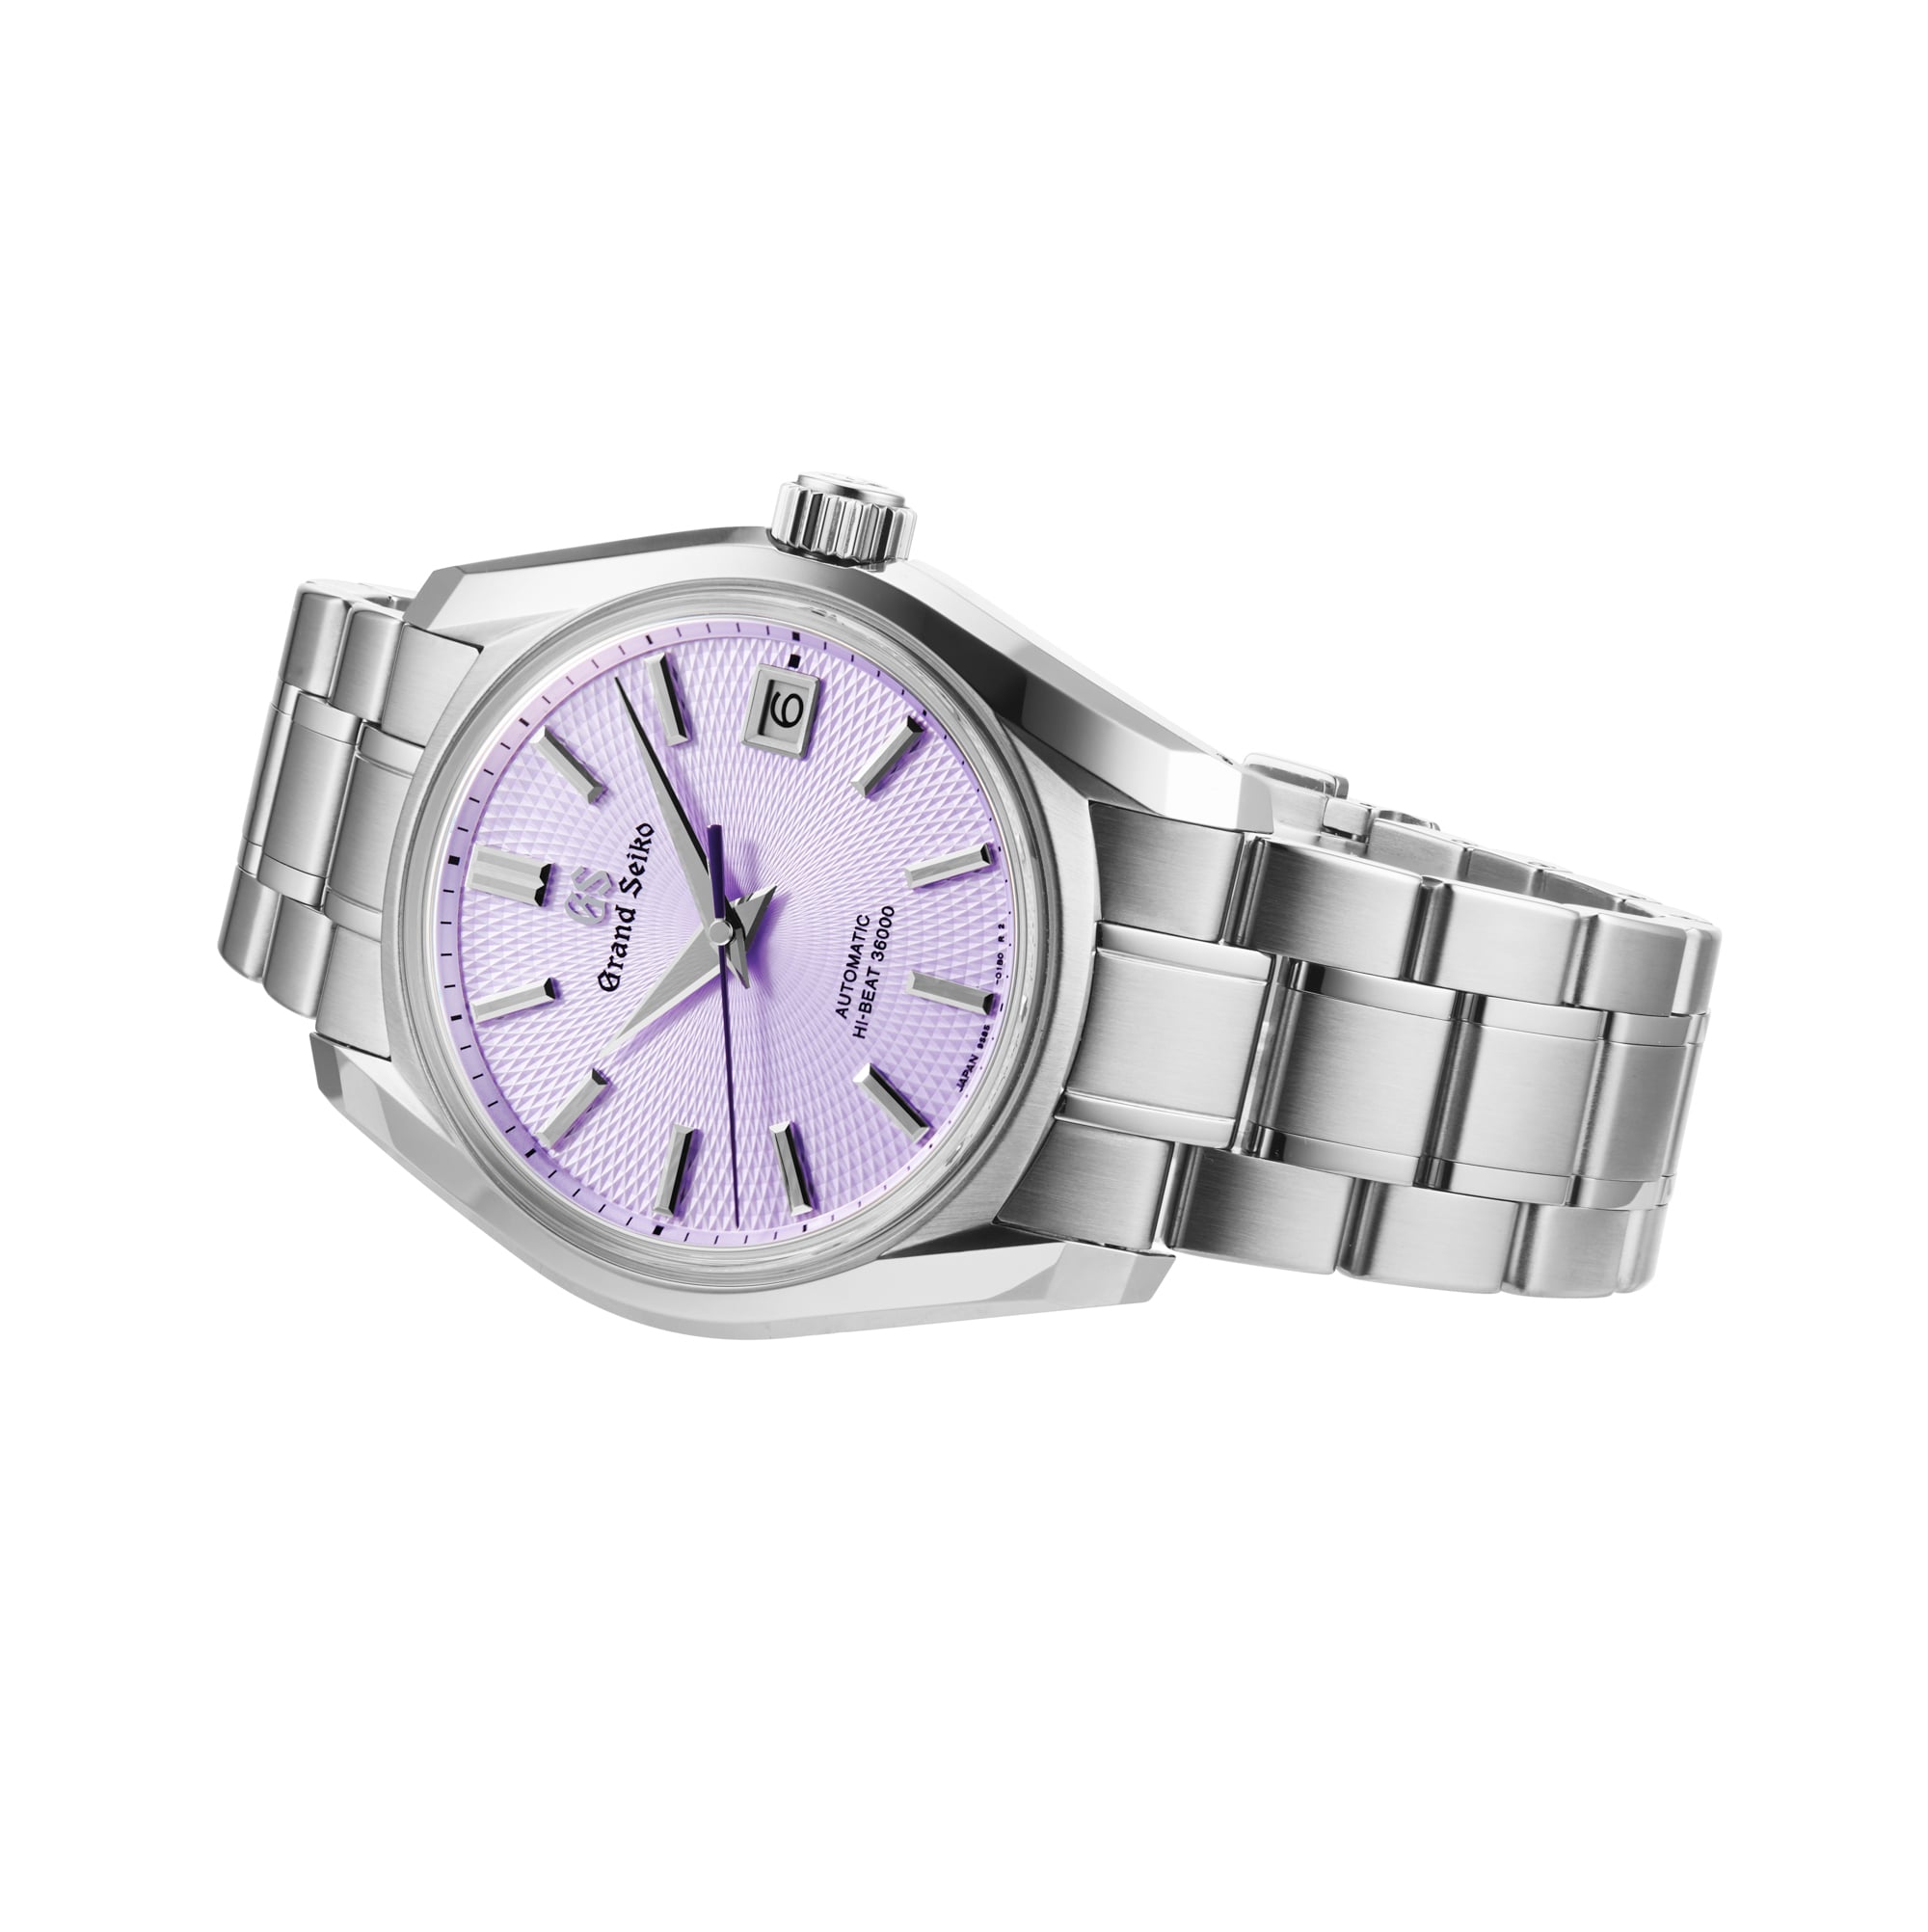 Buying Guide - 5 Watches Showing that Purple Could be the Trend of 2022